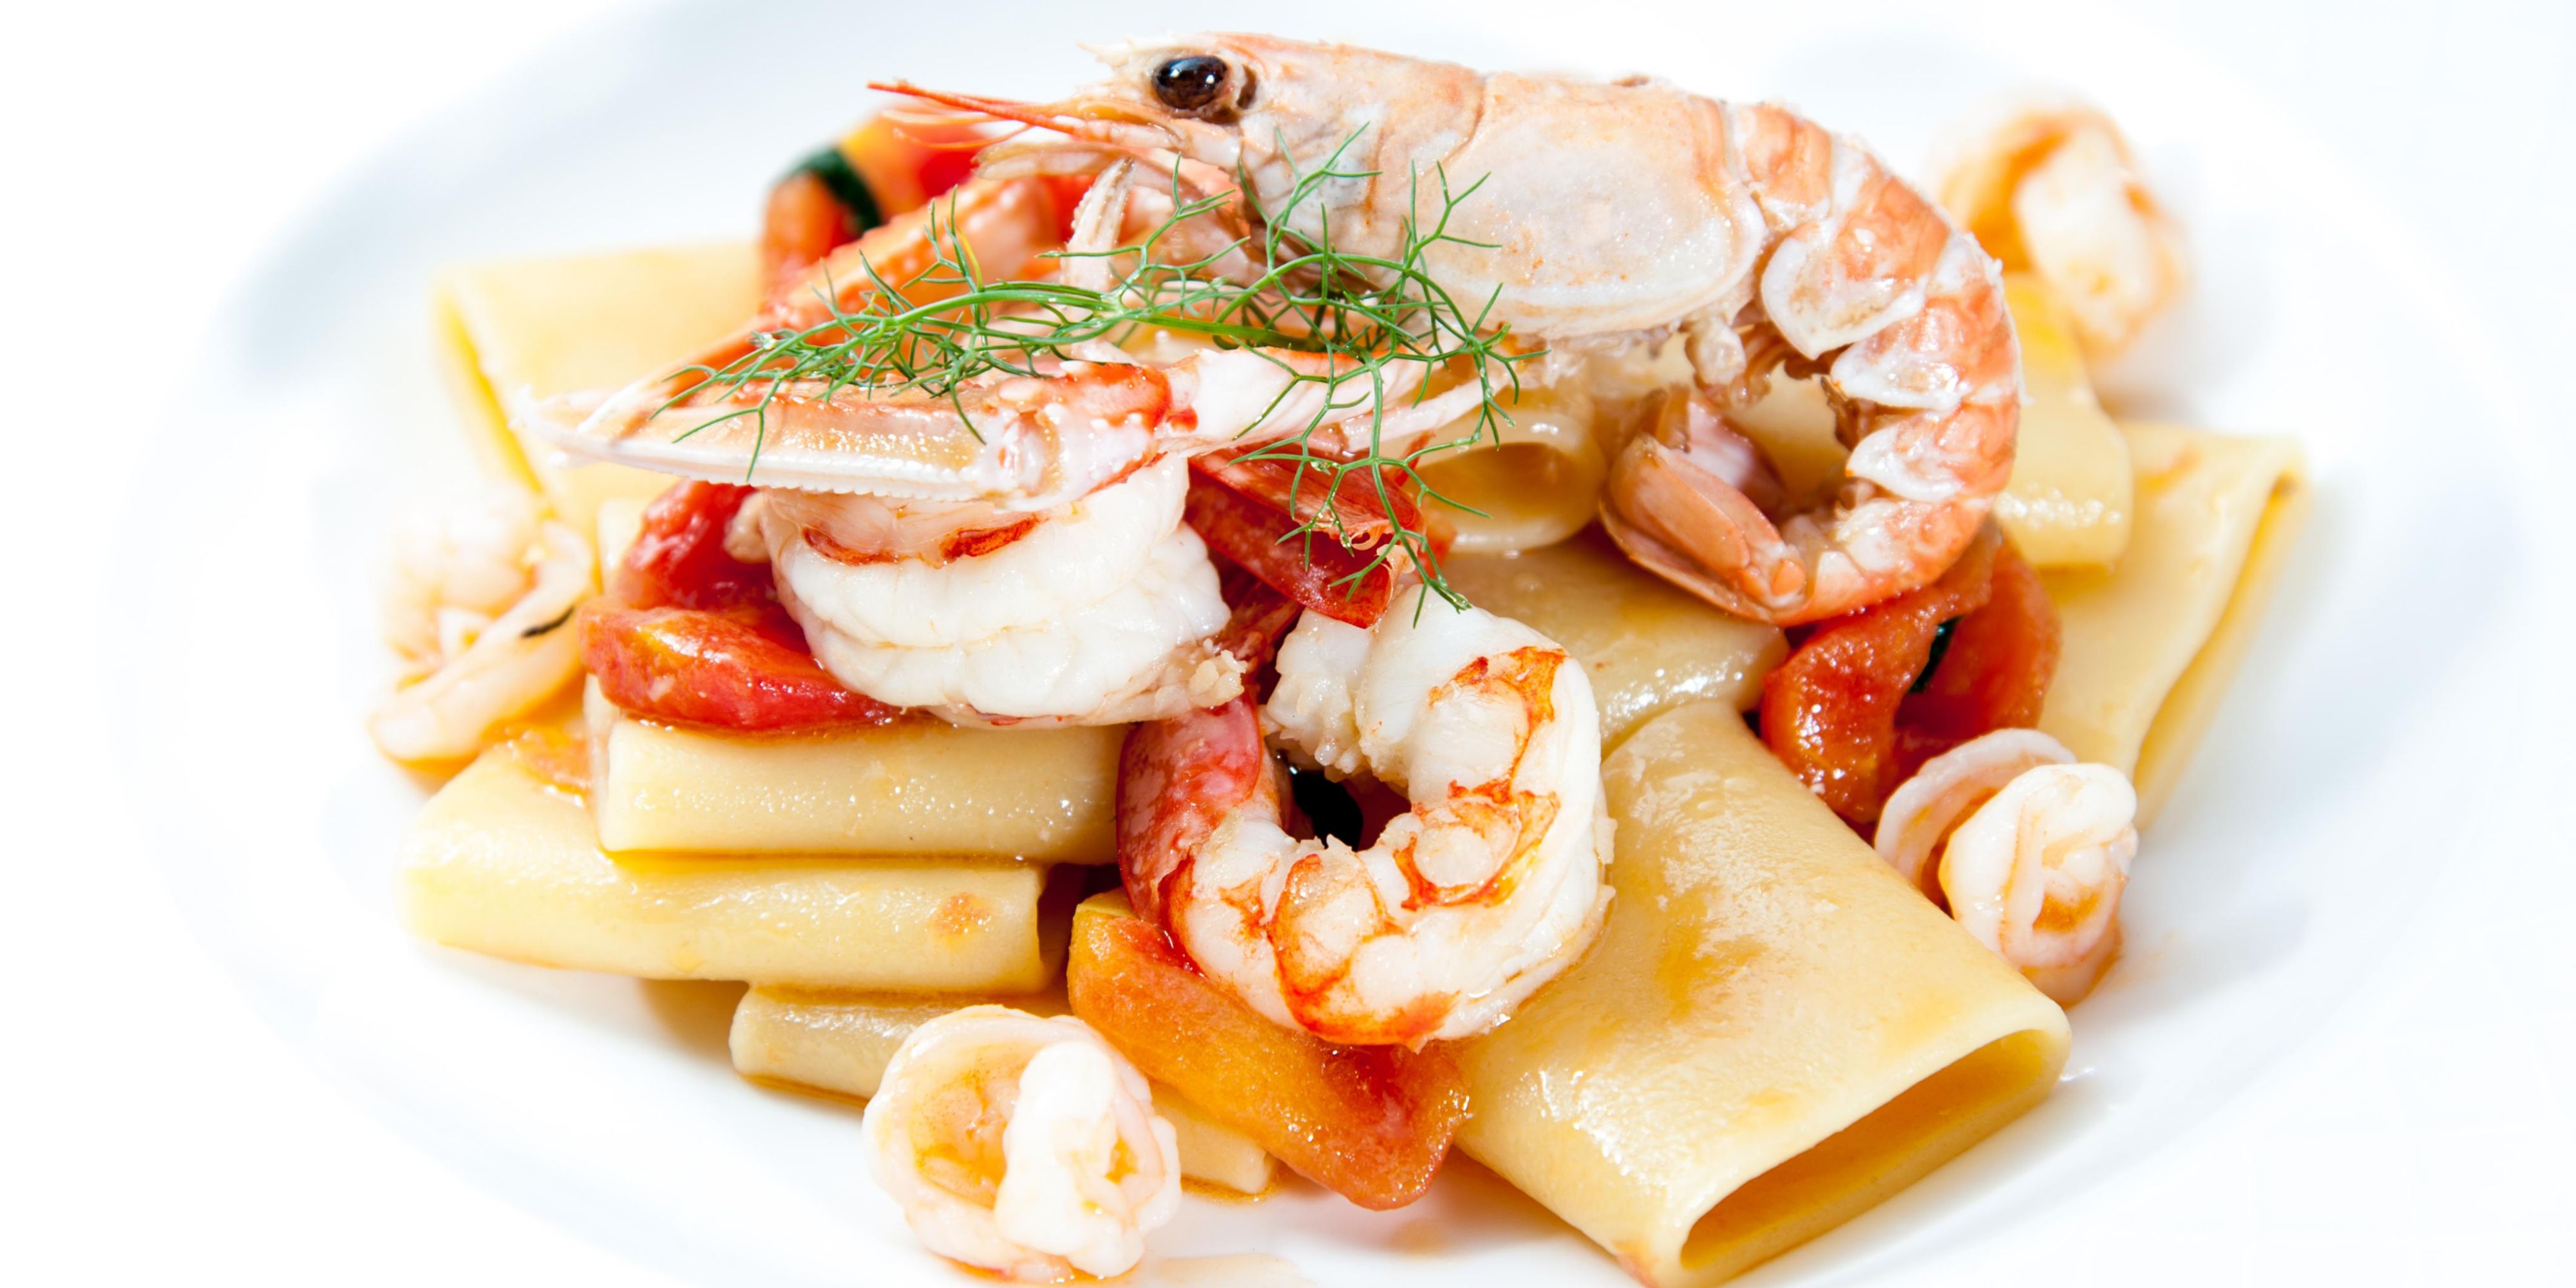 Try our specialties in our Papillon restaurant